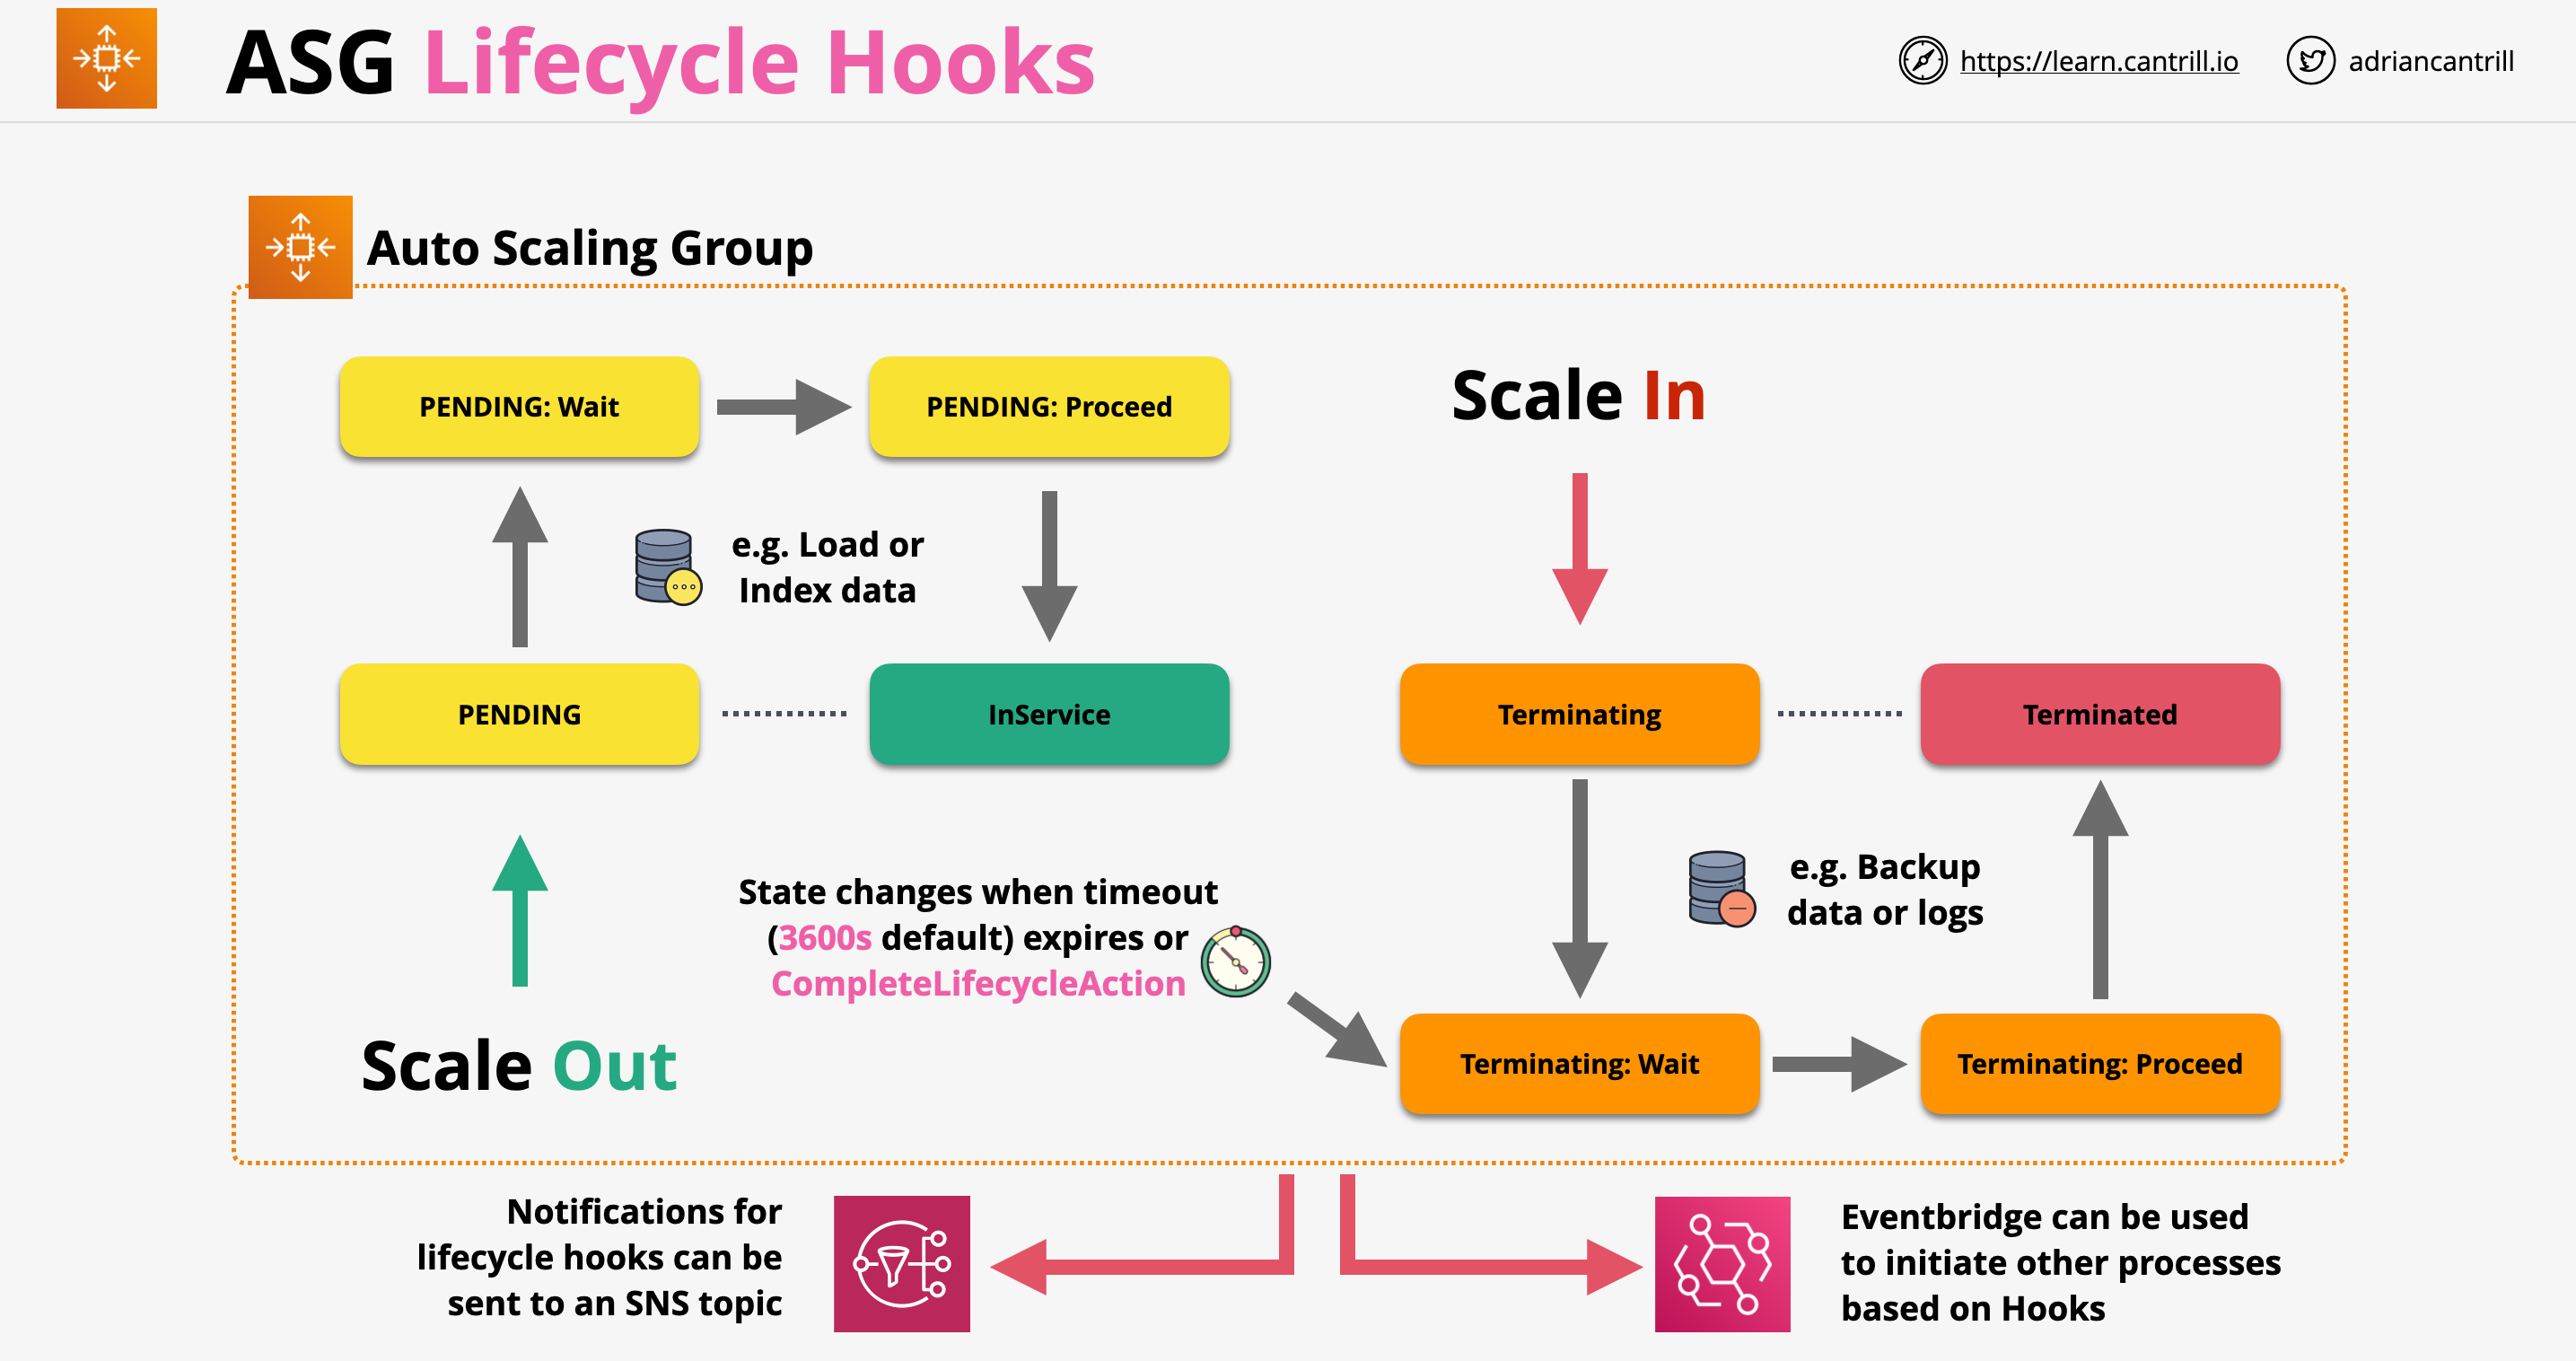 ASG Lifecycle Hooks